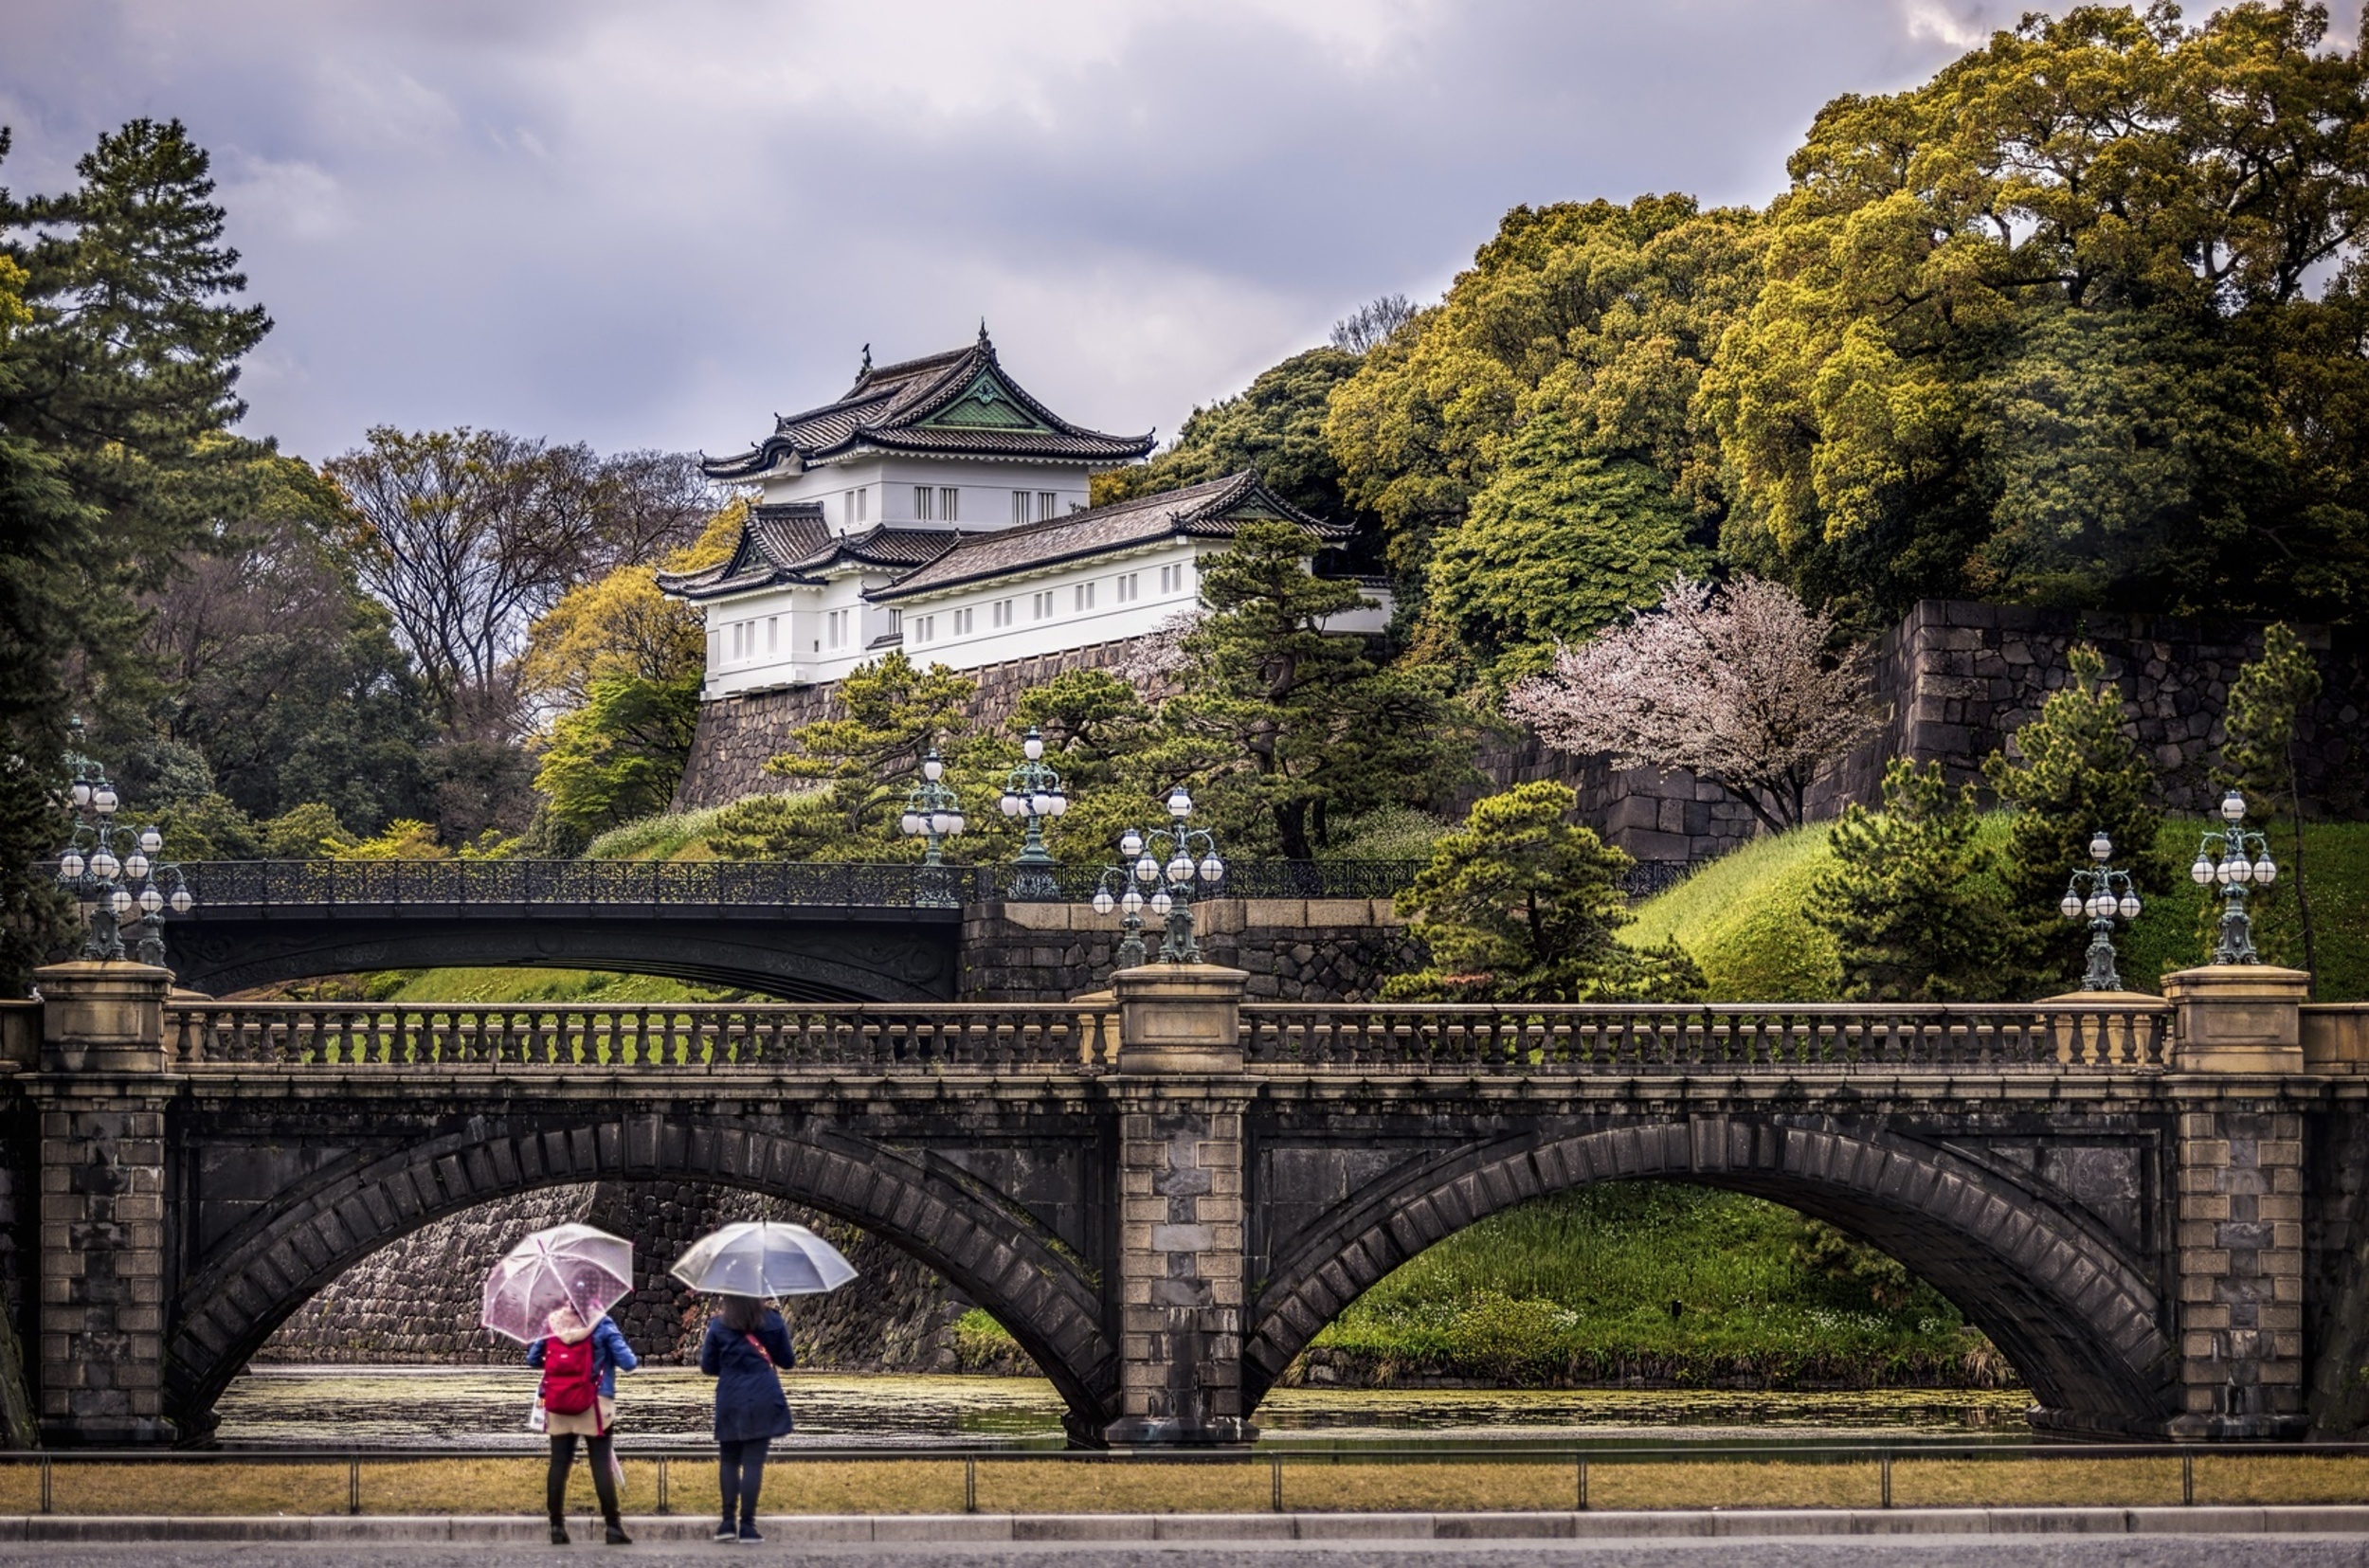 <p>The Imperial Palace embodies the beauty of modern Tokyo. It's an ancient palace guarded by giant walls and lush foliage, yet is attacked on all sides by skyscrapers. That's the story of modern Tokyo, the battle between ancient relics and modern invention. </p><p>You may also like: <a href='https://www.yardbarker.com/lifestyle/articles/20_spinach_recipes_you_absolutely_must_try_032024/s1__39117830'>20 spinach recipes you absolutely must try</a></p>